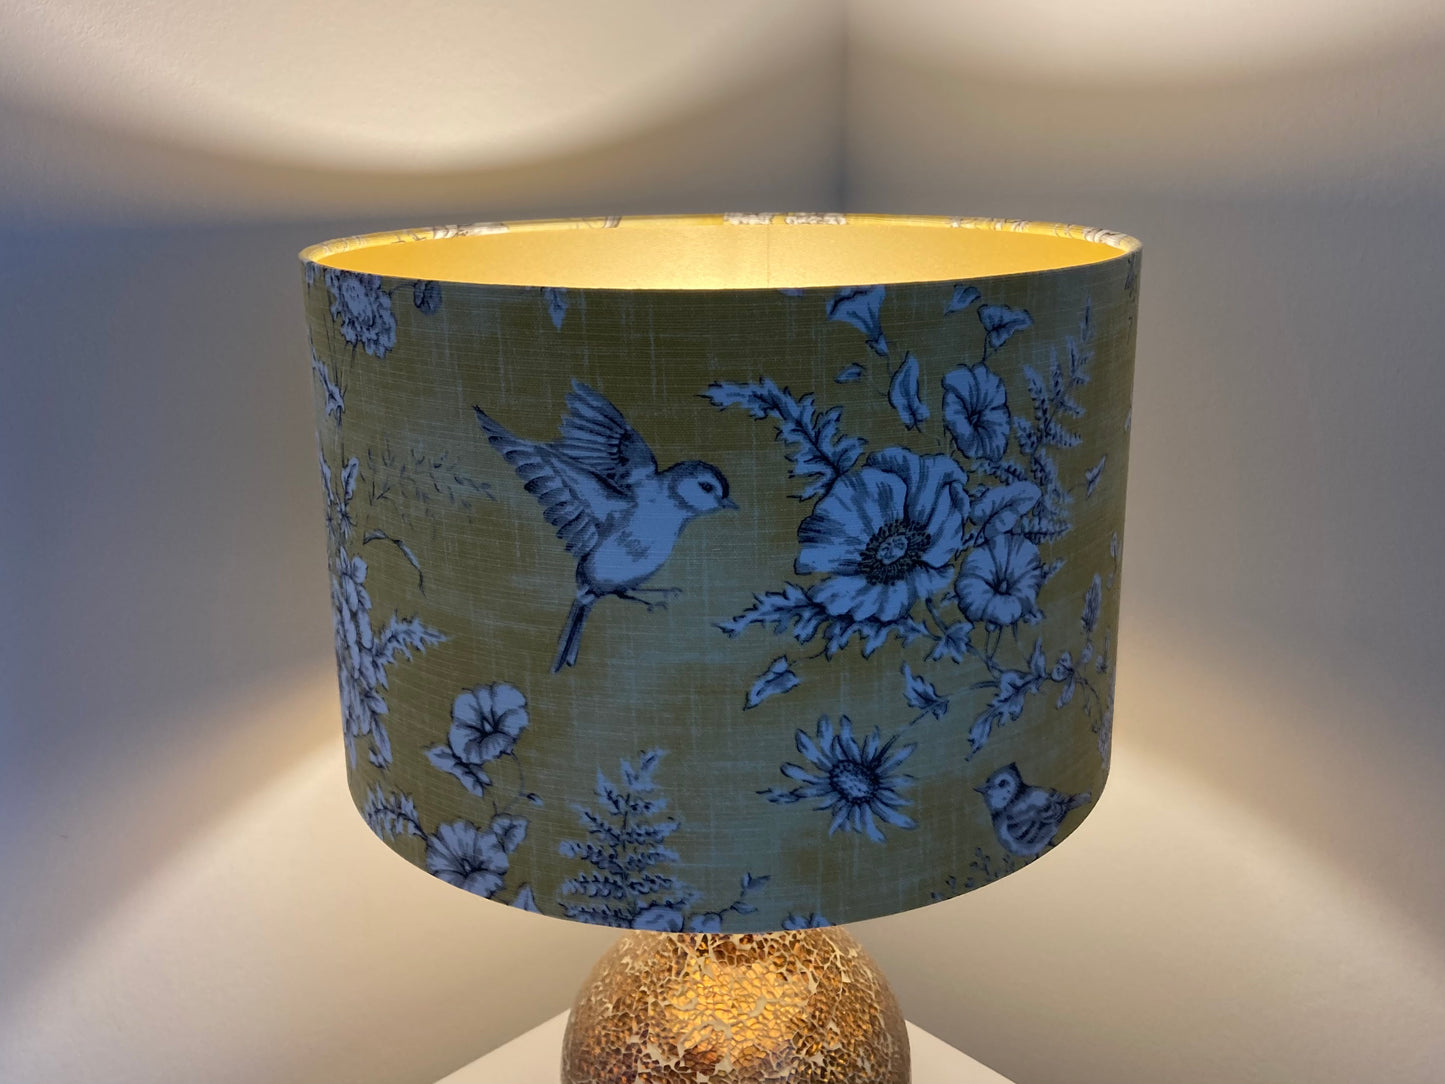 Yellow Bird Fabric Lampshade for Table or Ceiling Lamps